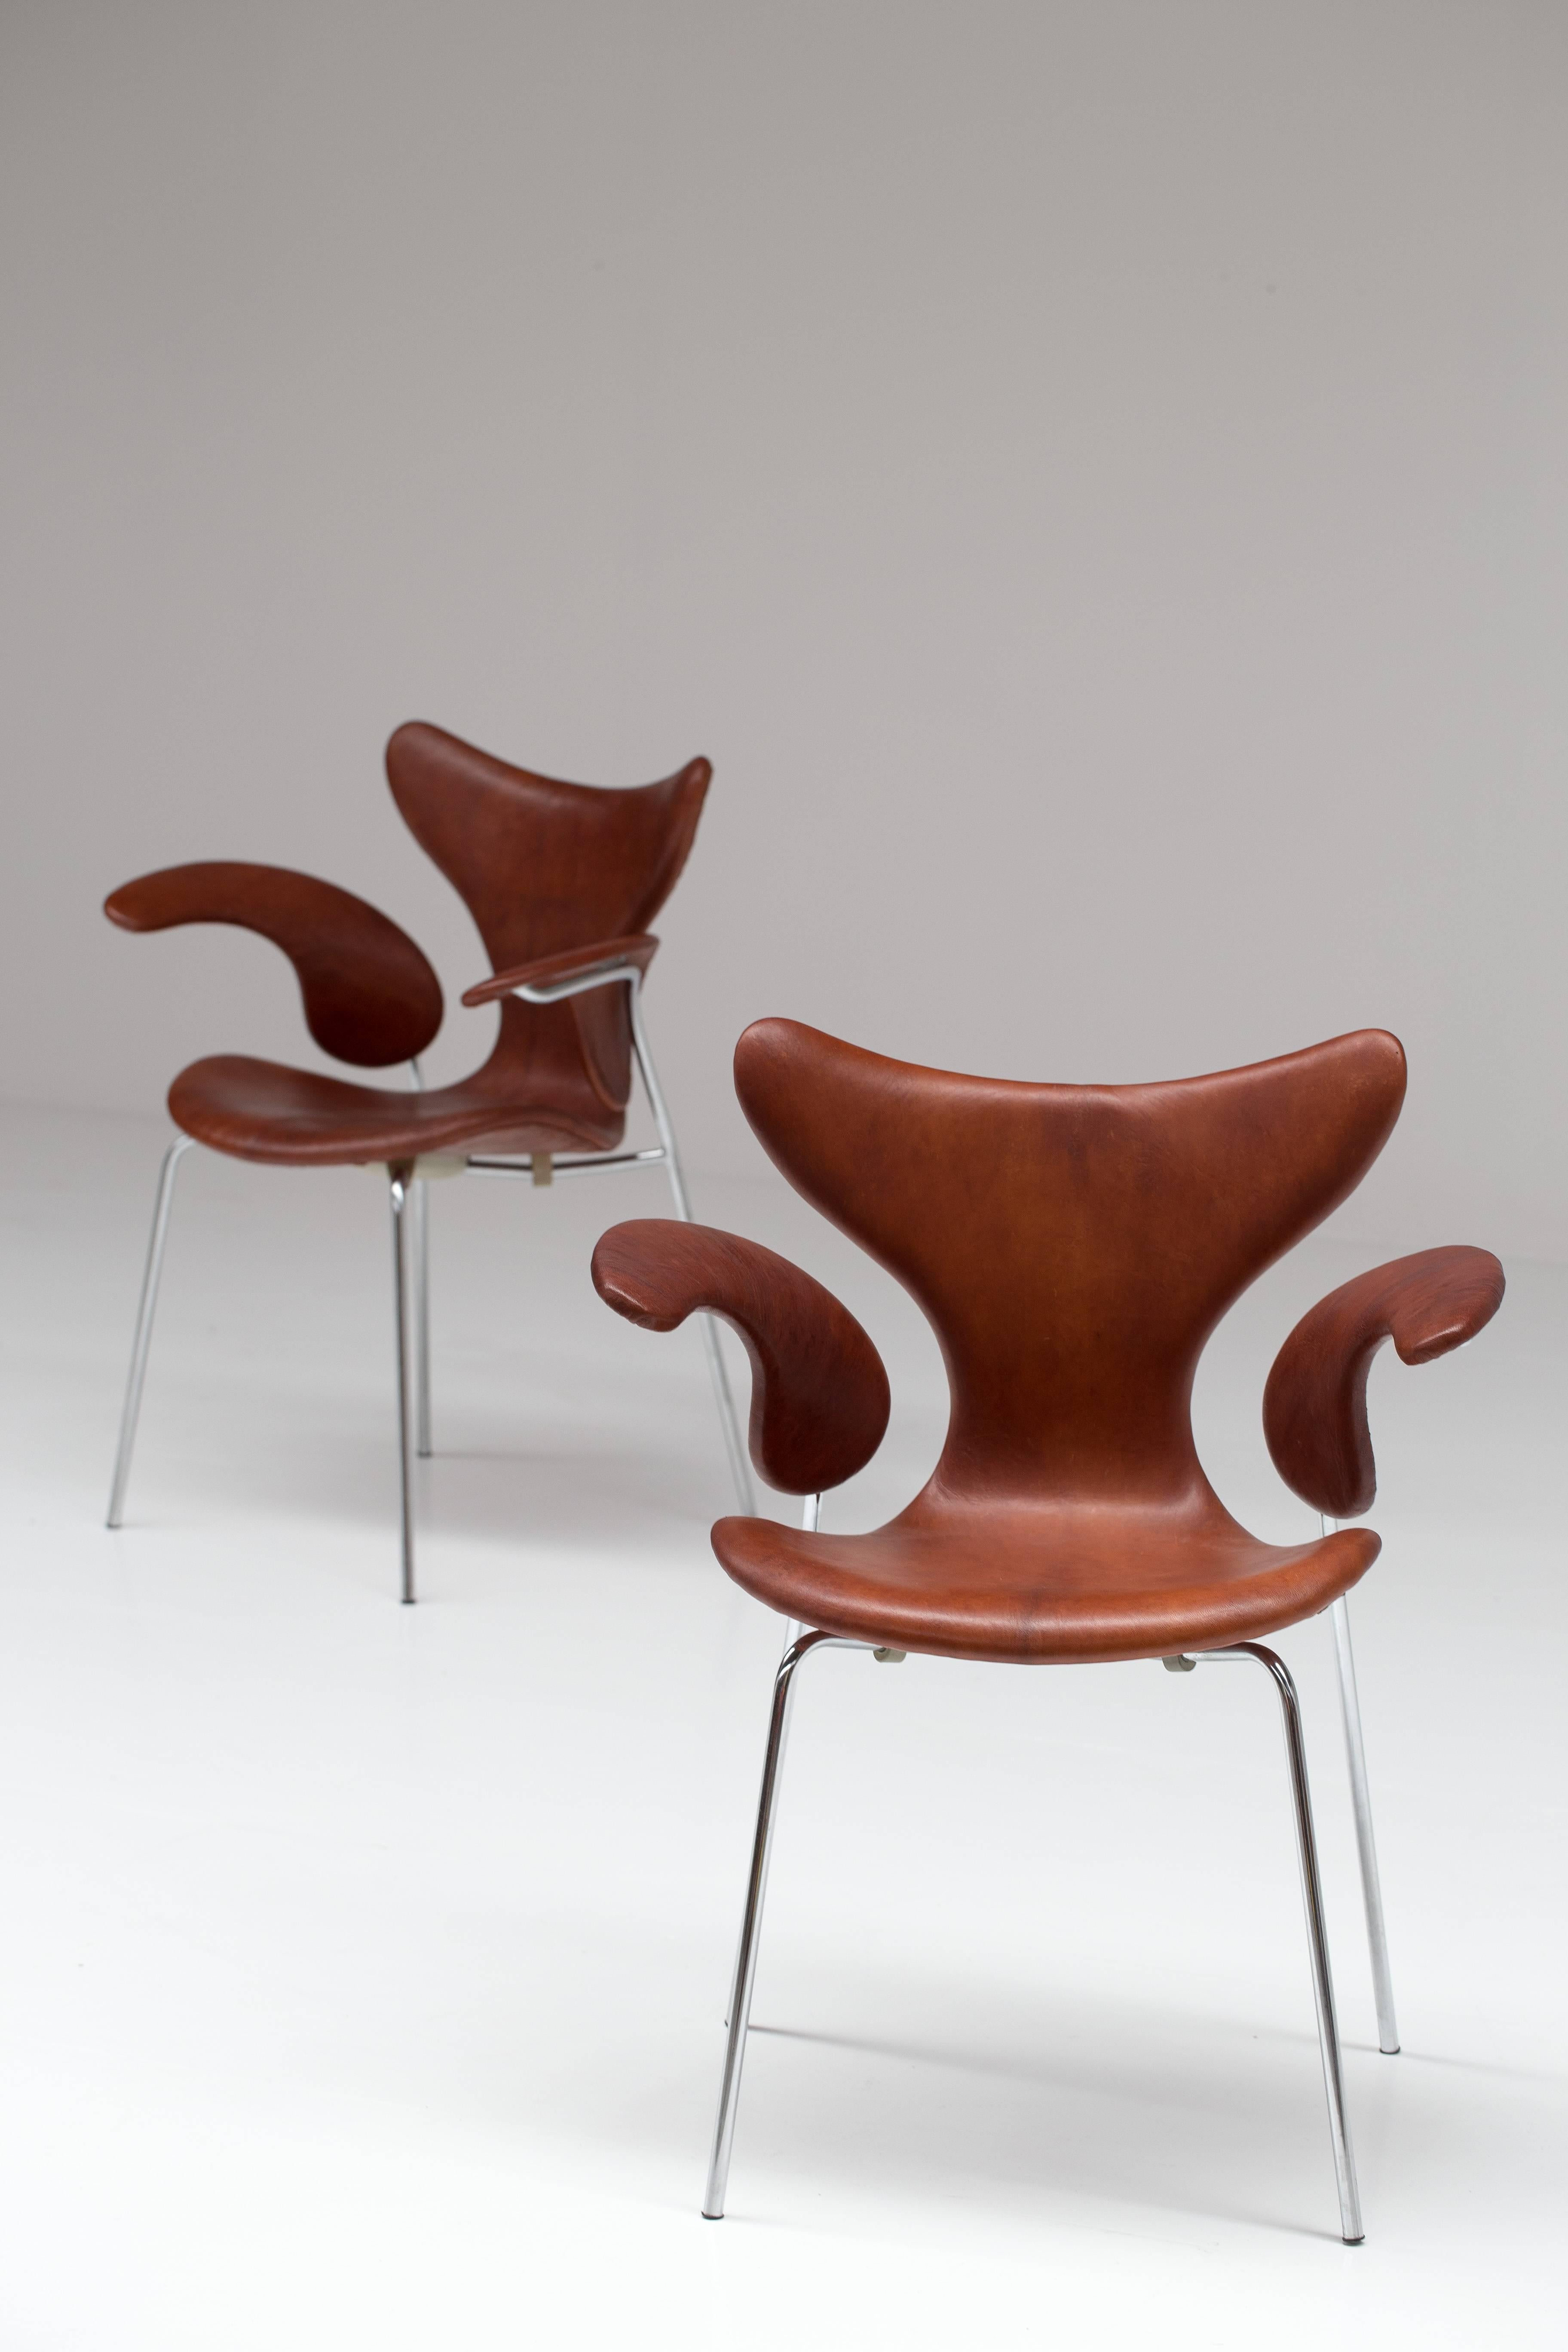 Pair of Leather Seagull Chairs In Excellent Condition For Sale In Brugge, BE